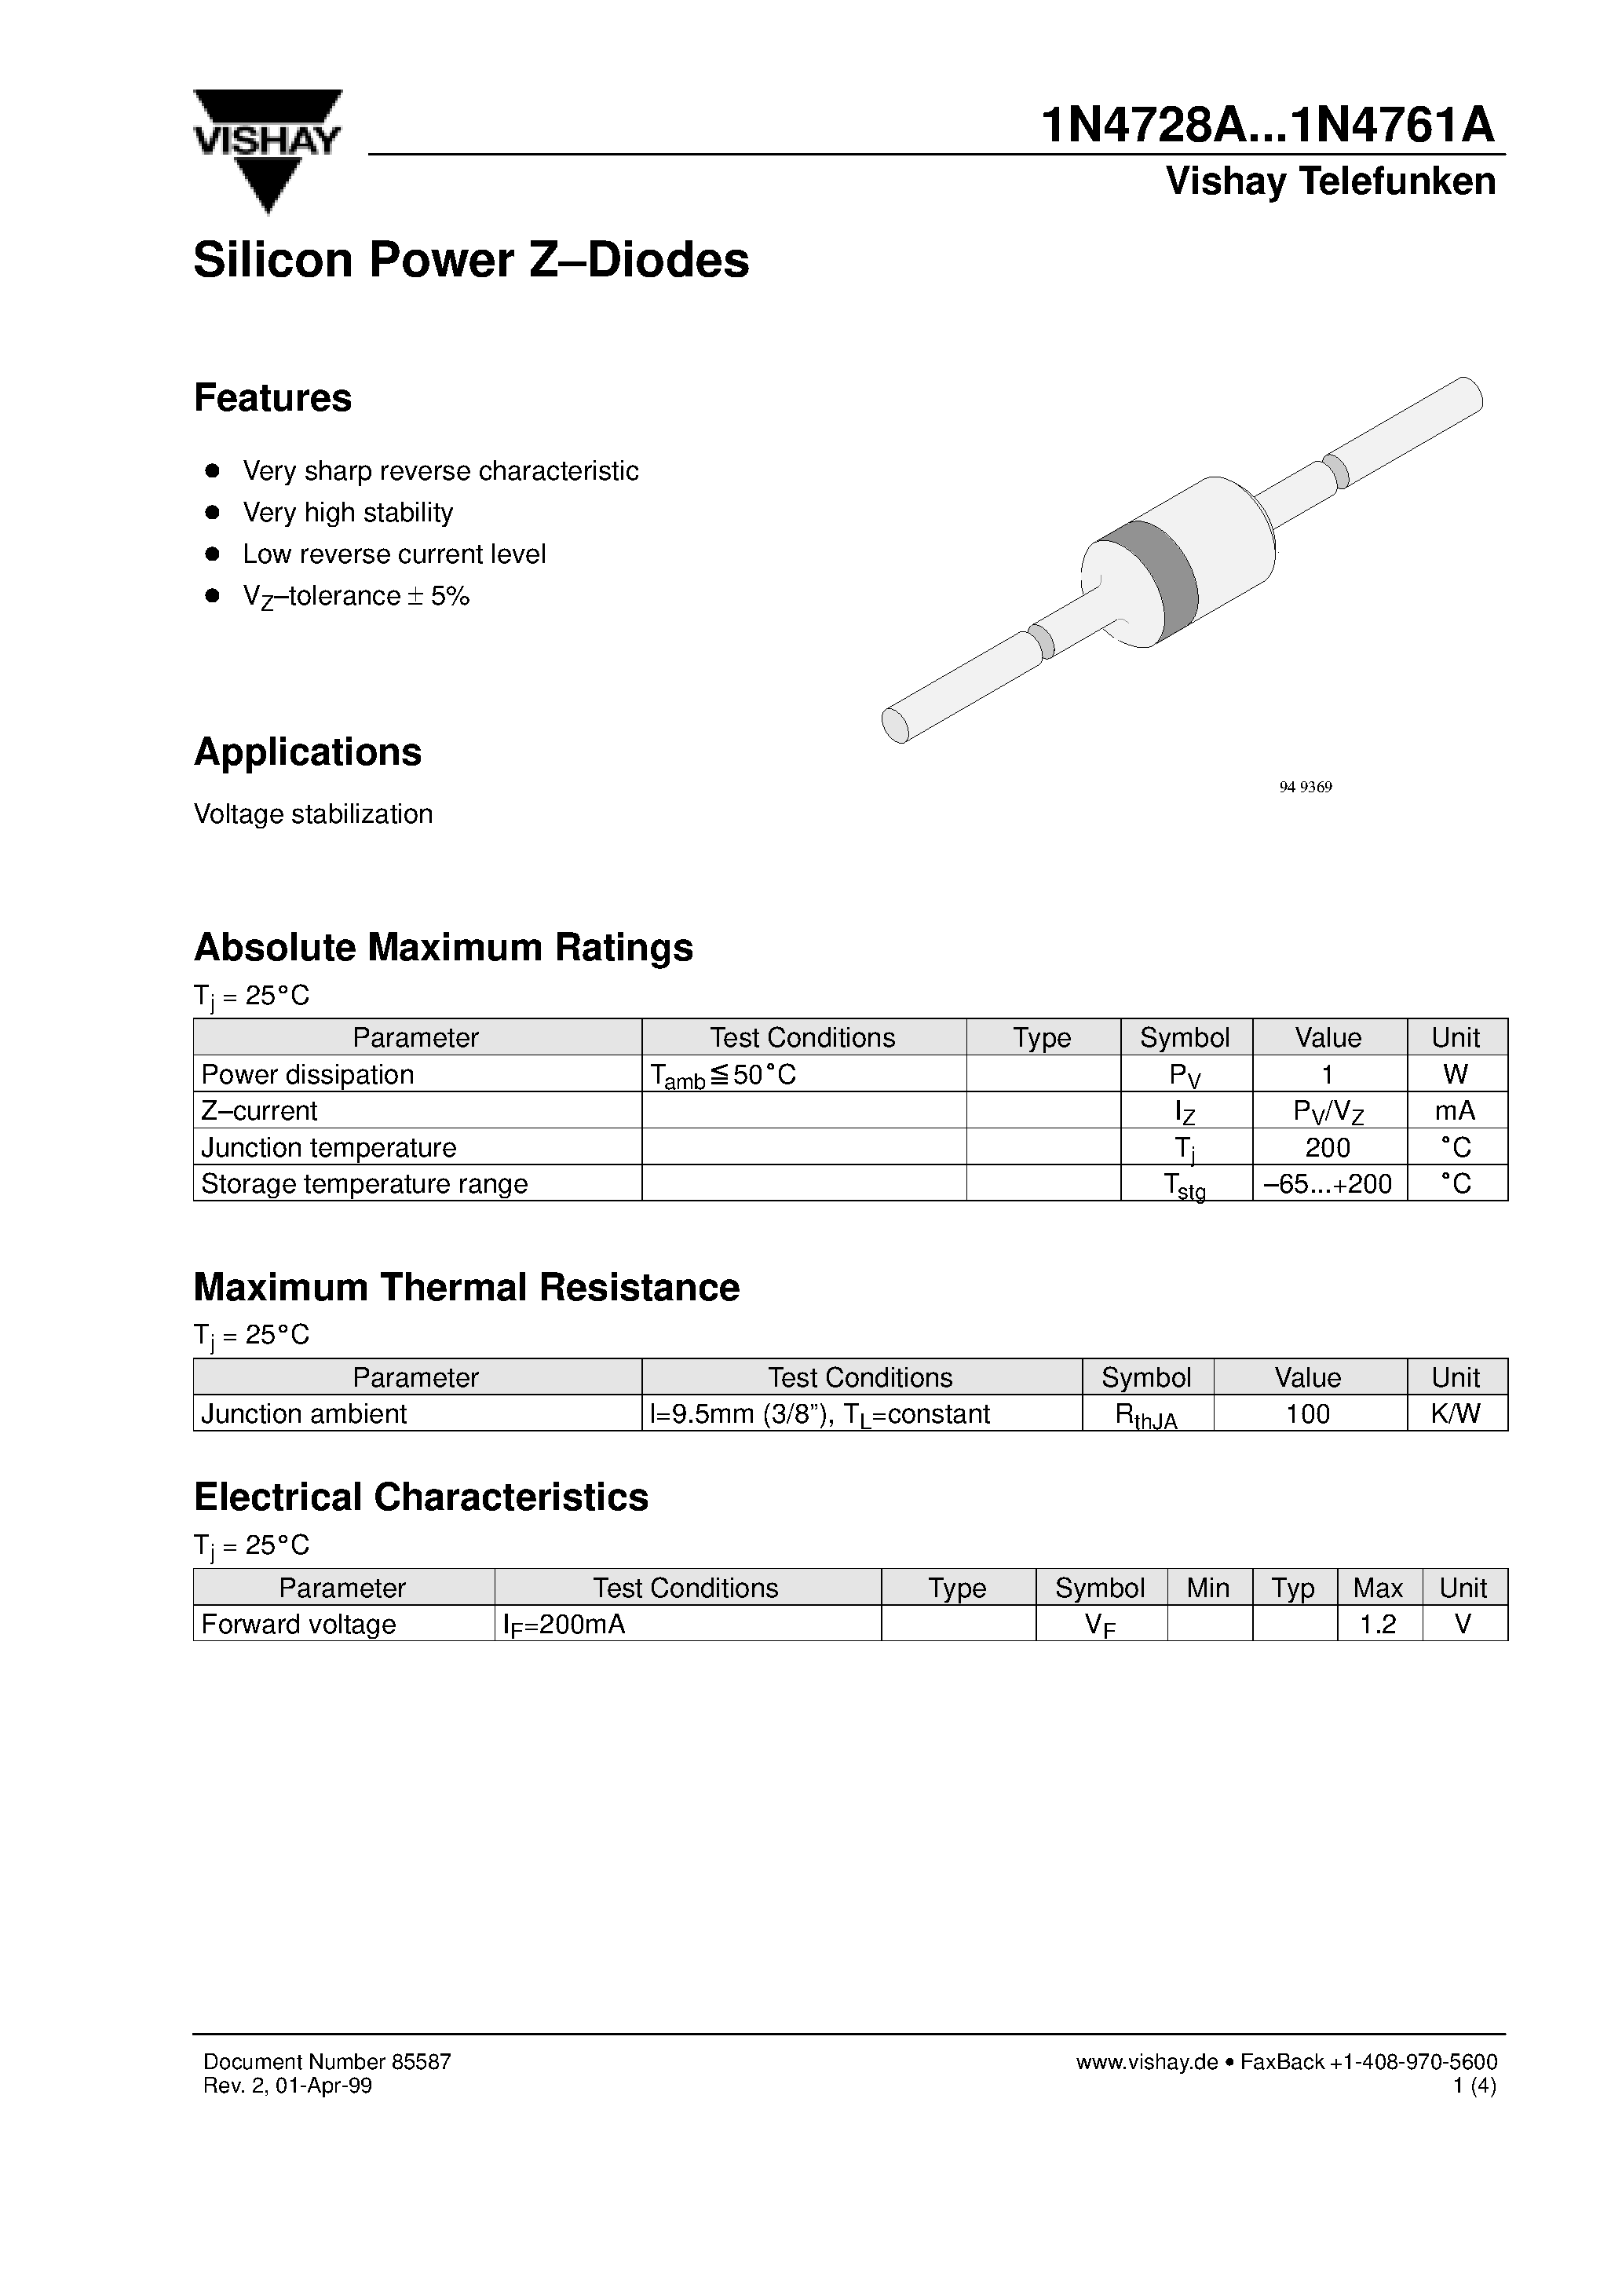 Даташит 1N4759A - Silicon Power Z-Diodes страница 1